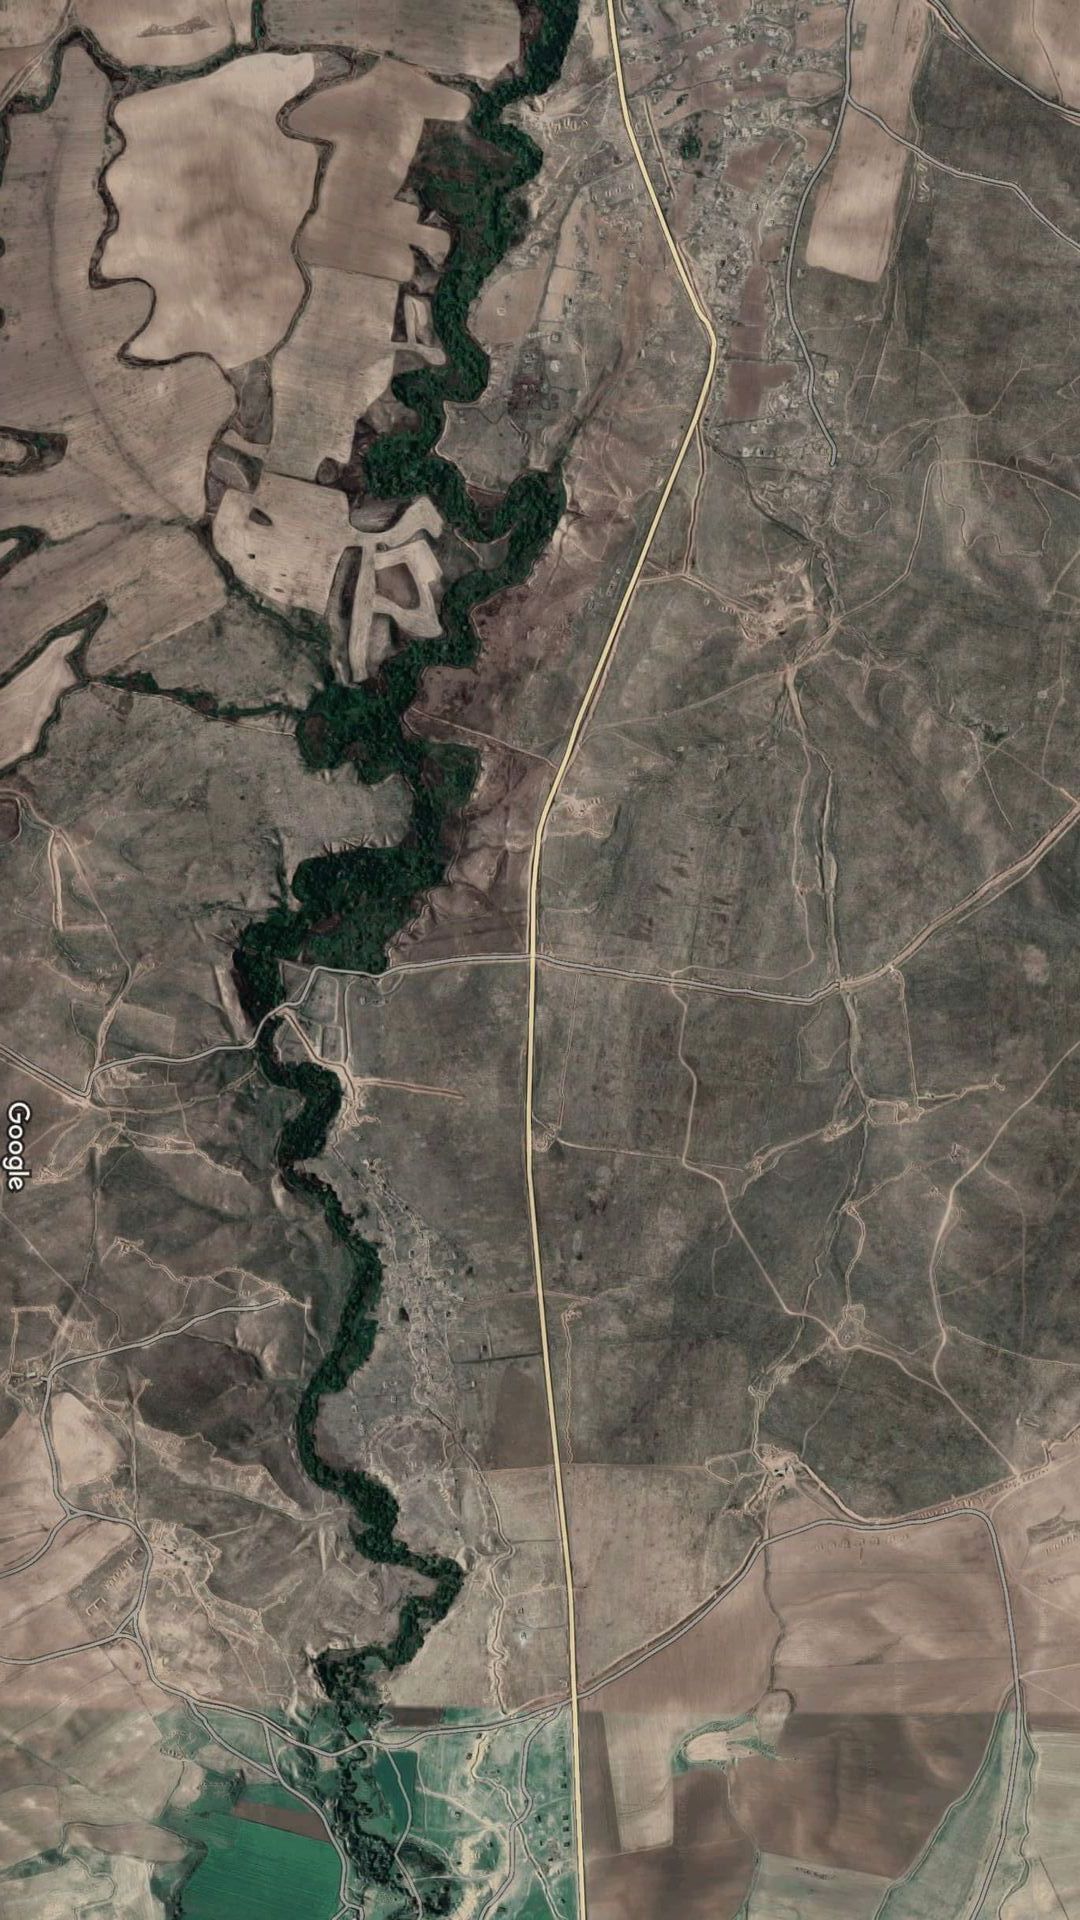 an arial mage of Lachin corridor on Google earth